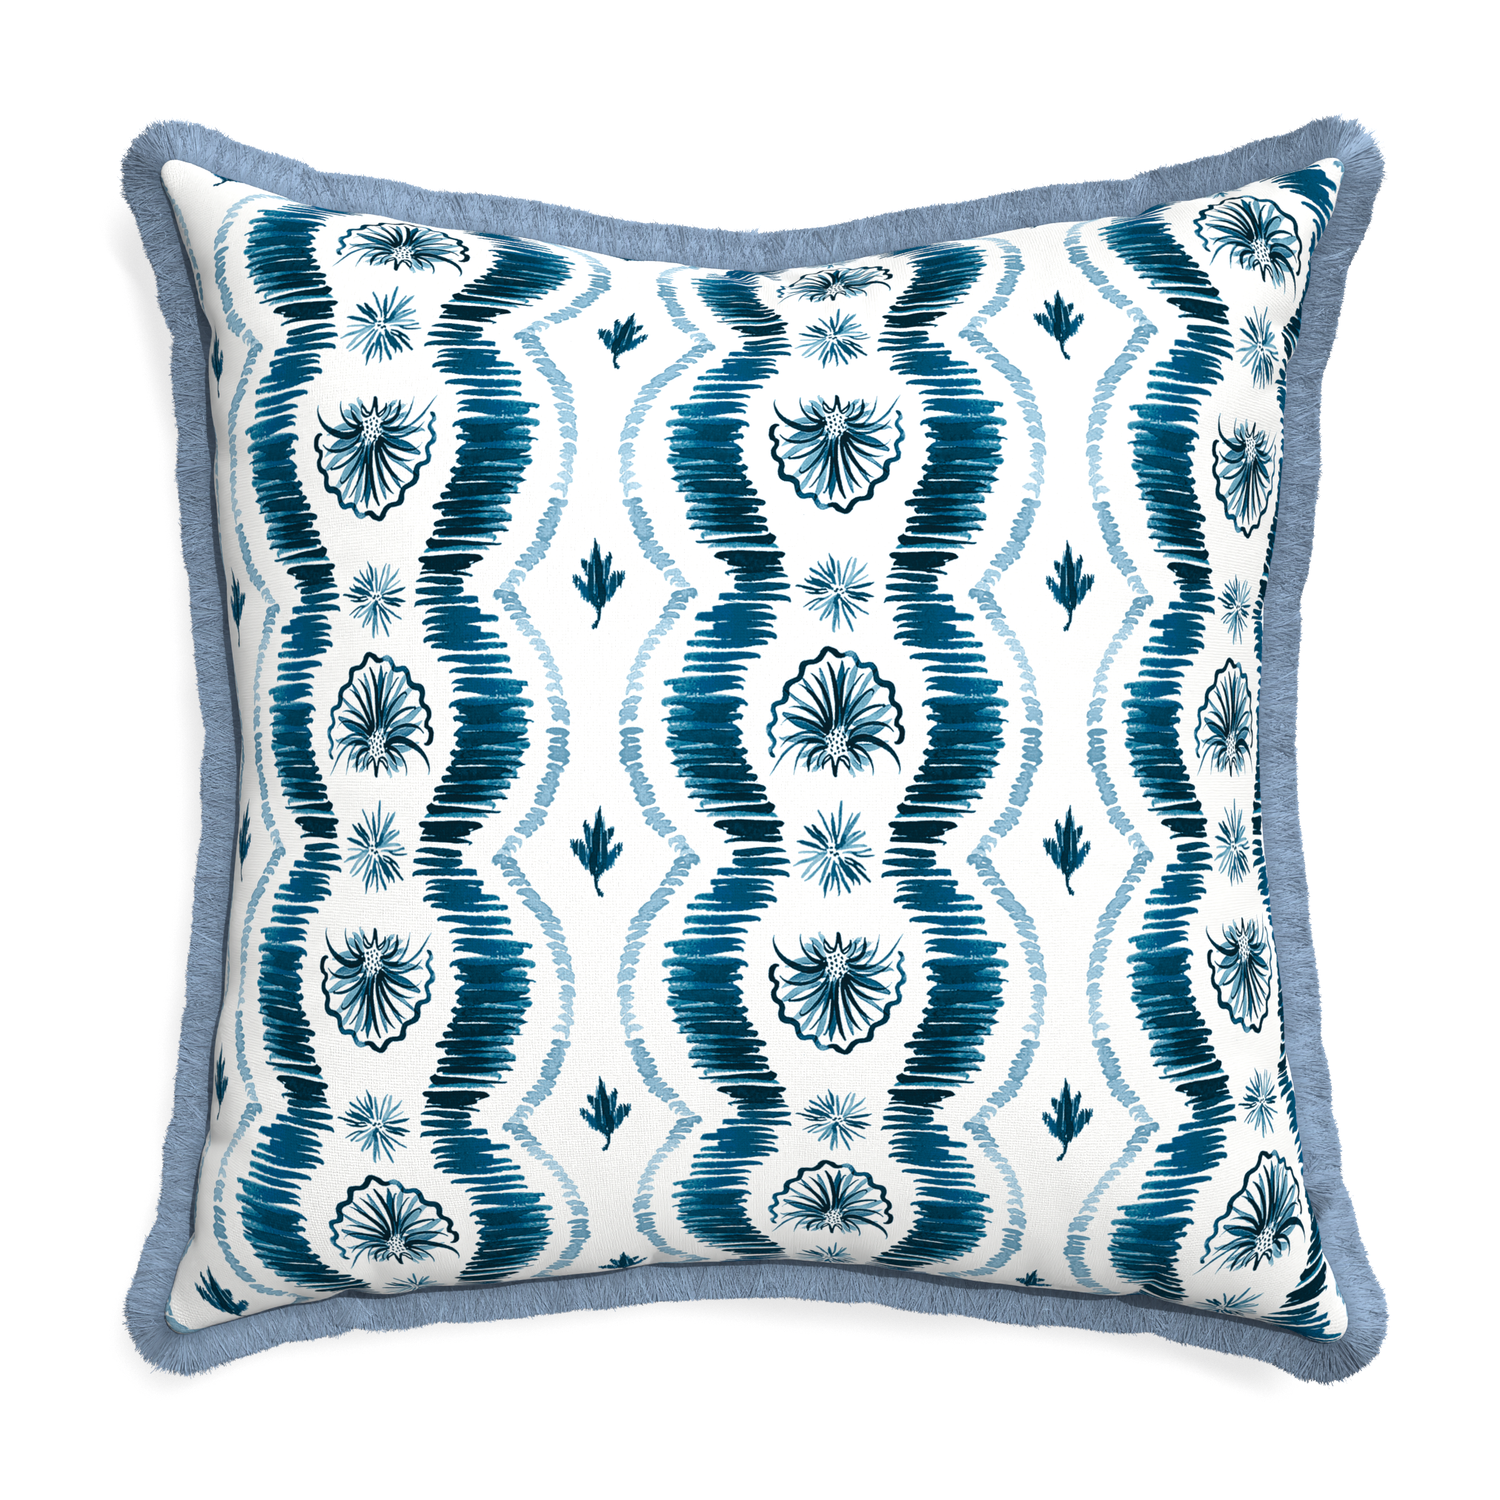 26 inch Square Blue Ikat Stripe Pillow with sky blue fringe